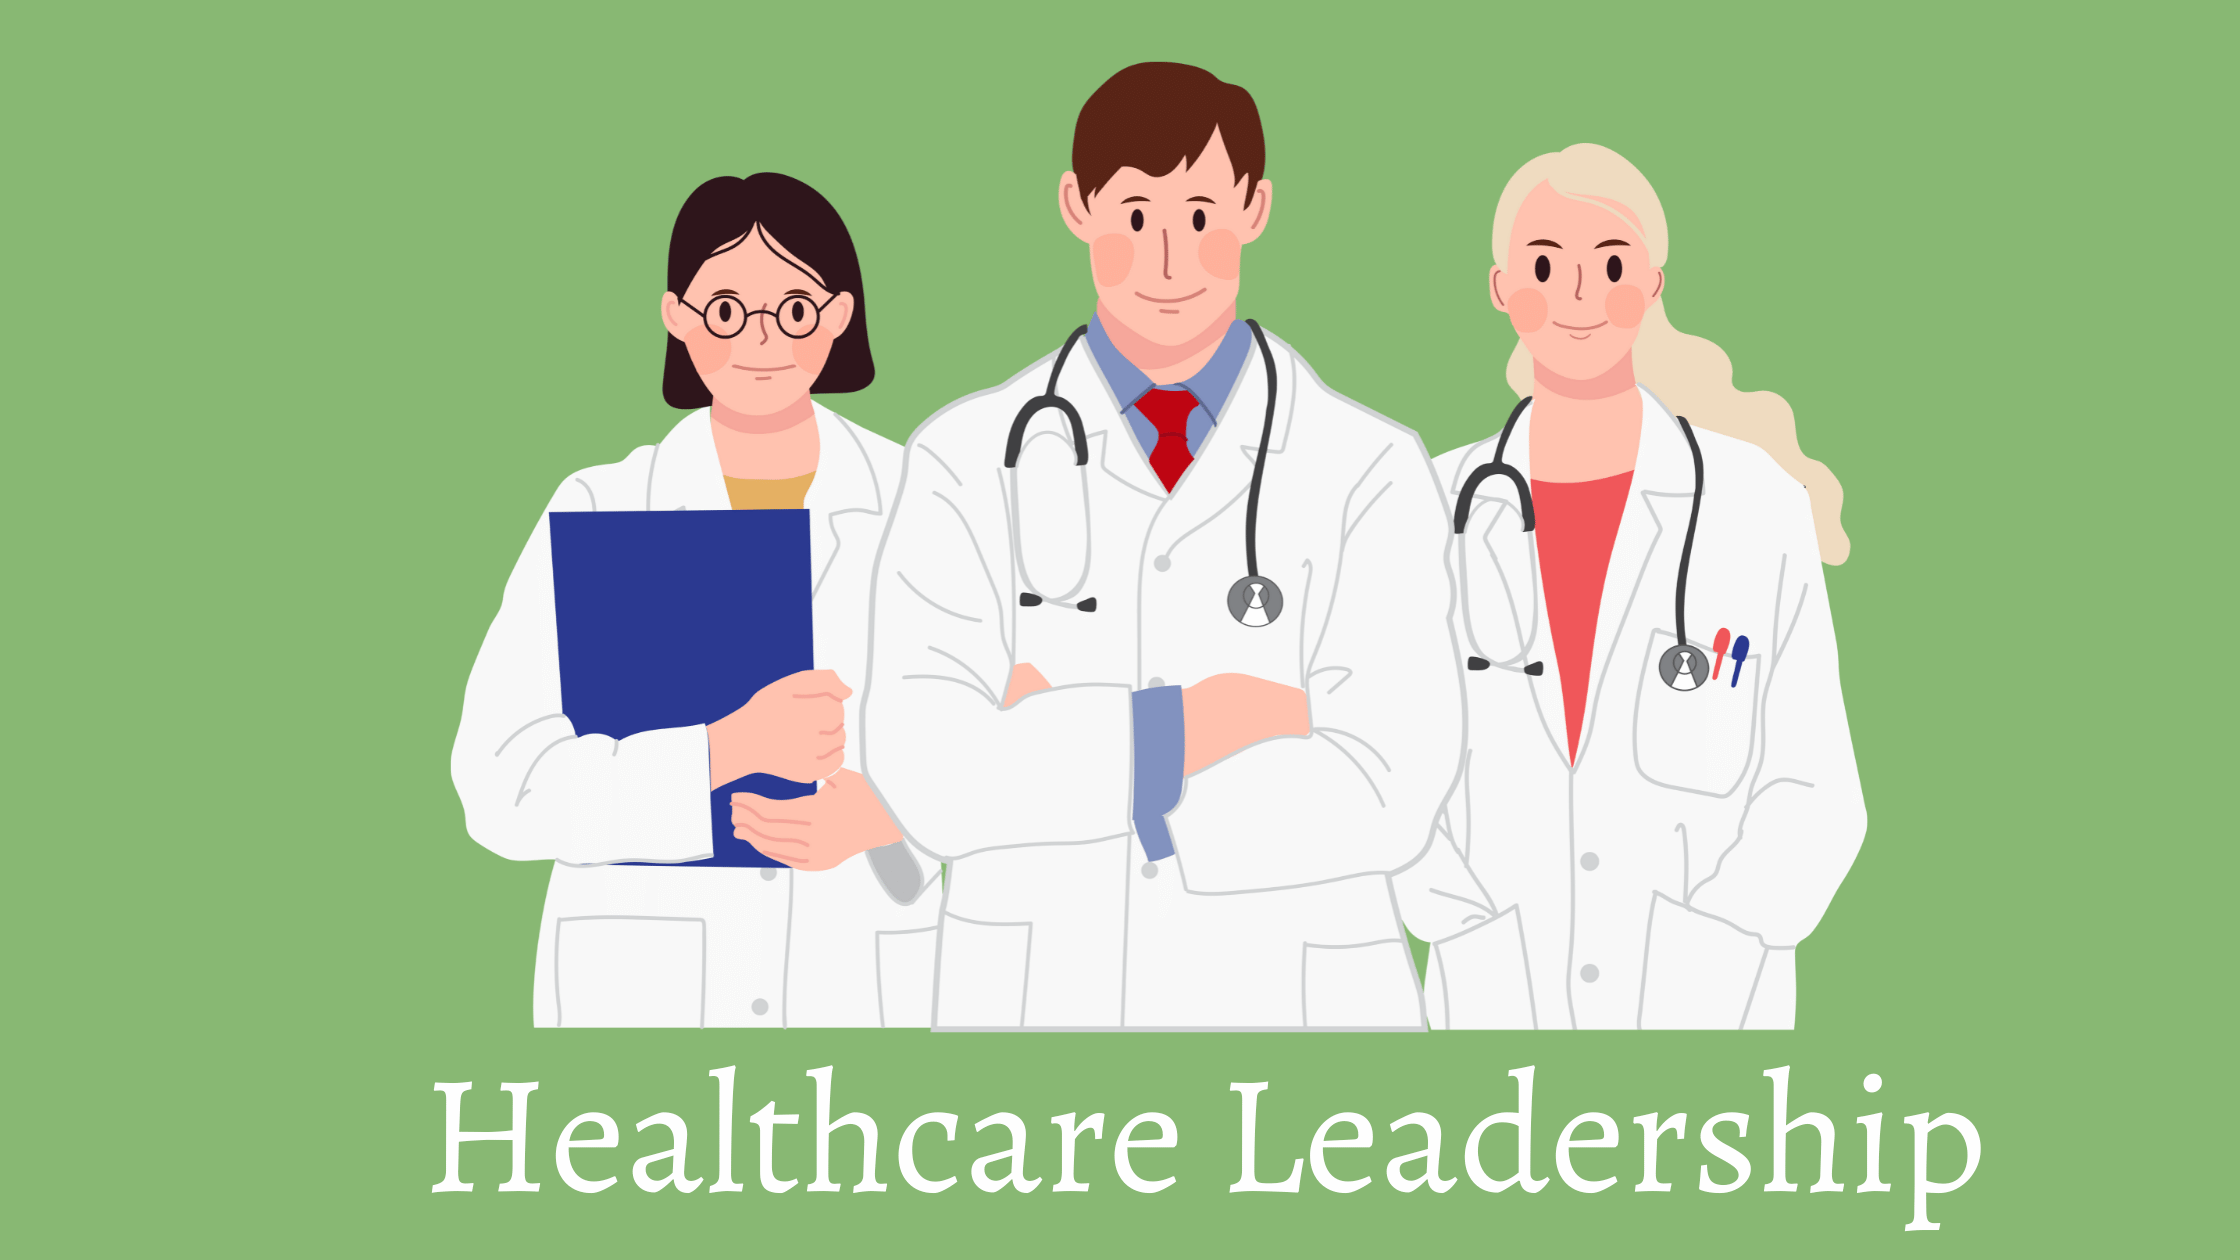 Role of Healthcare Leadership